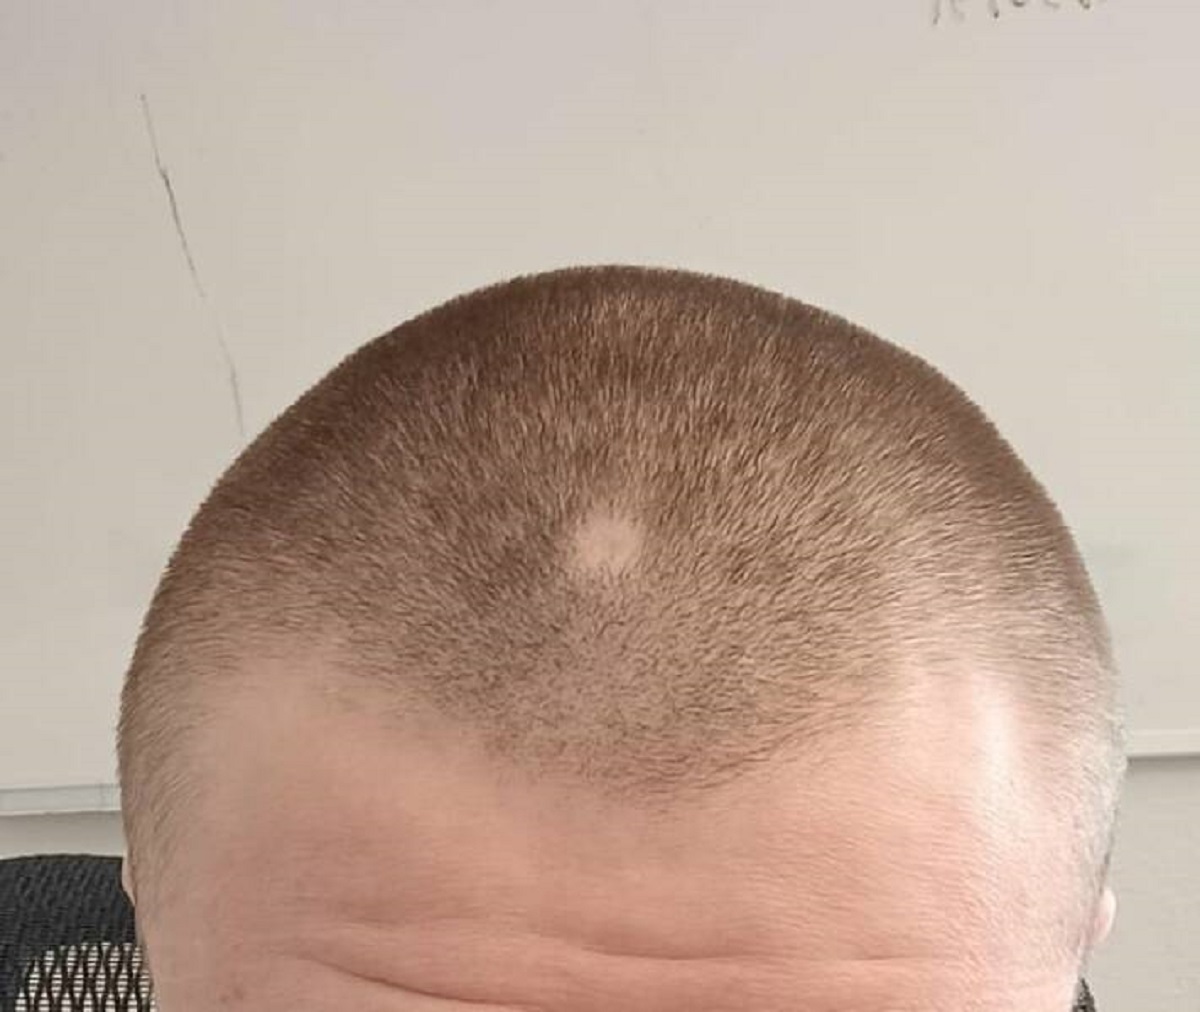 "Didn't realise I had a bald spot until after I buzzed my hair"